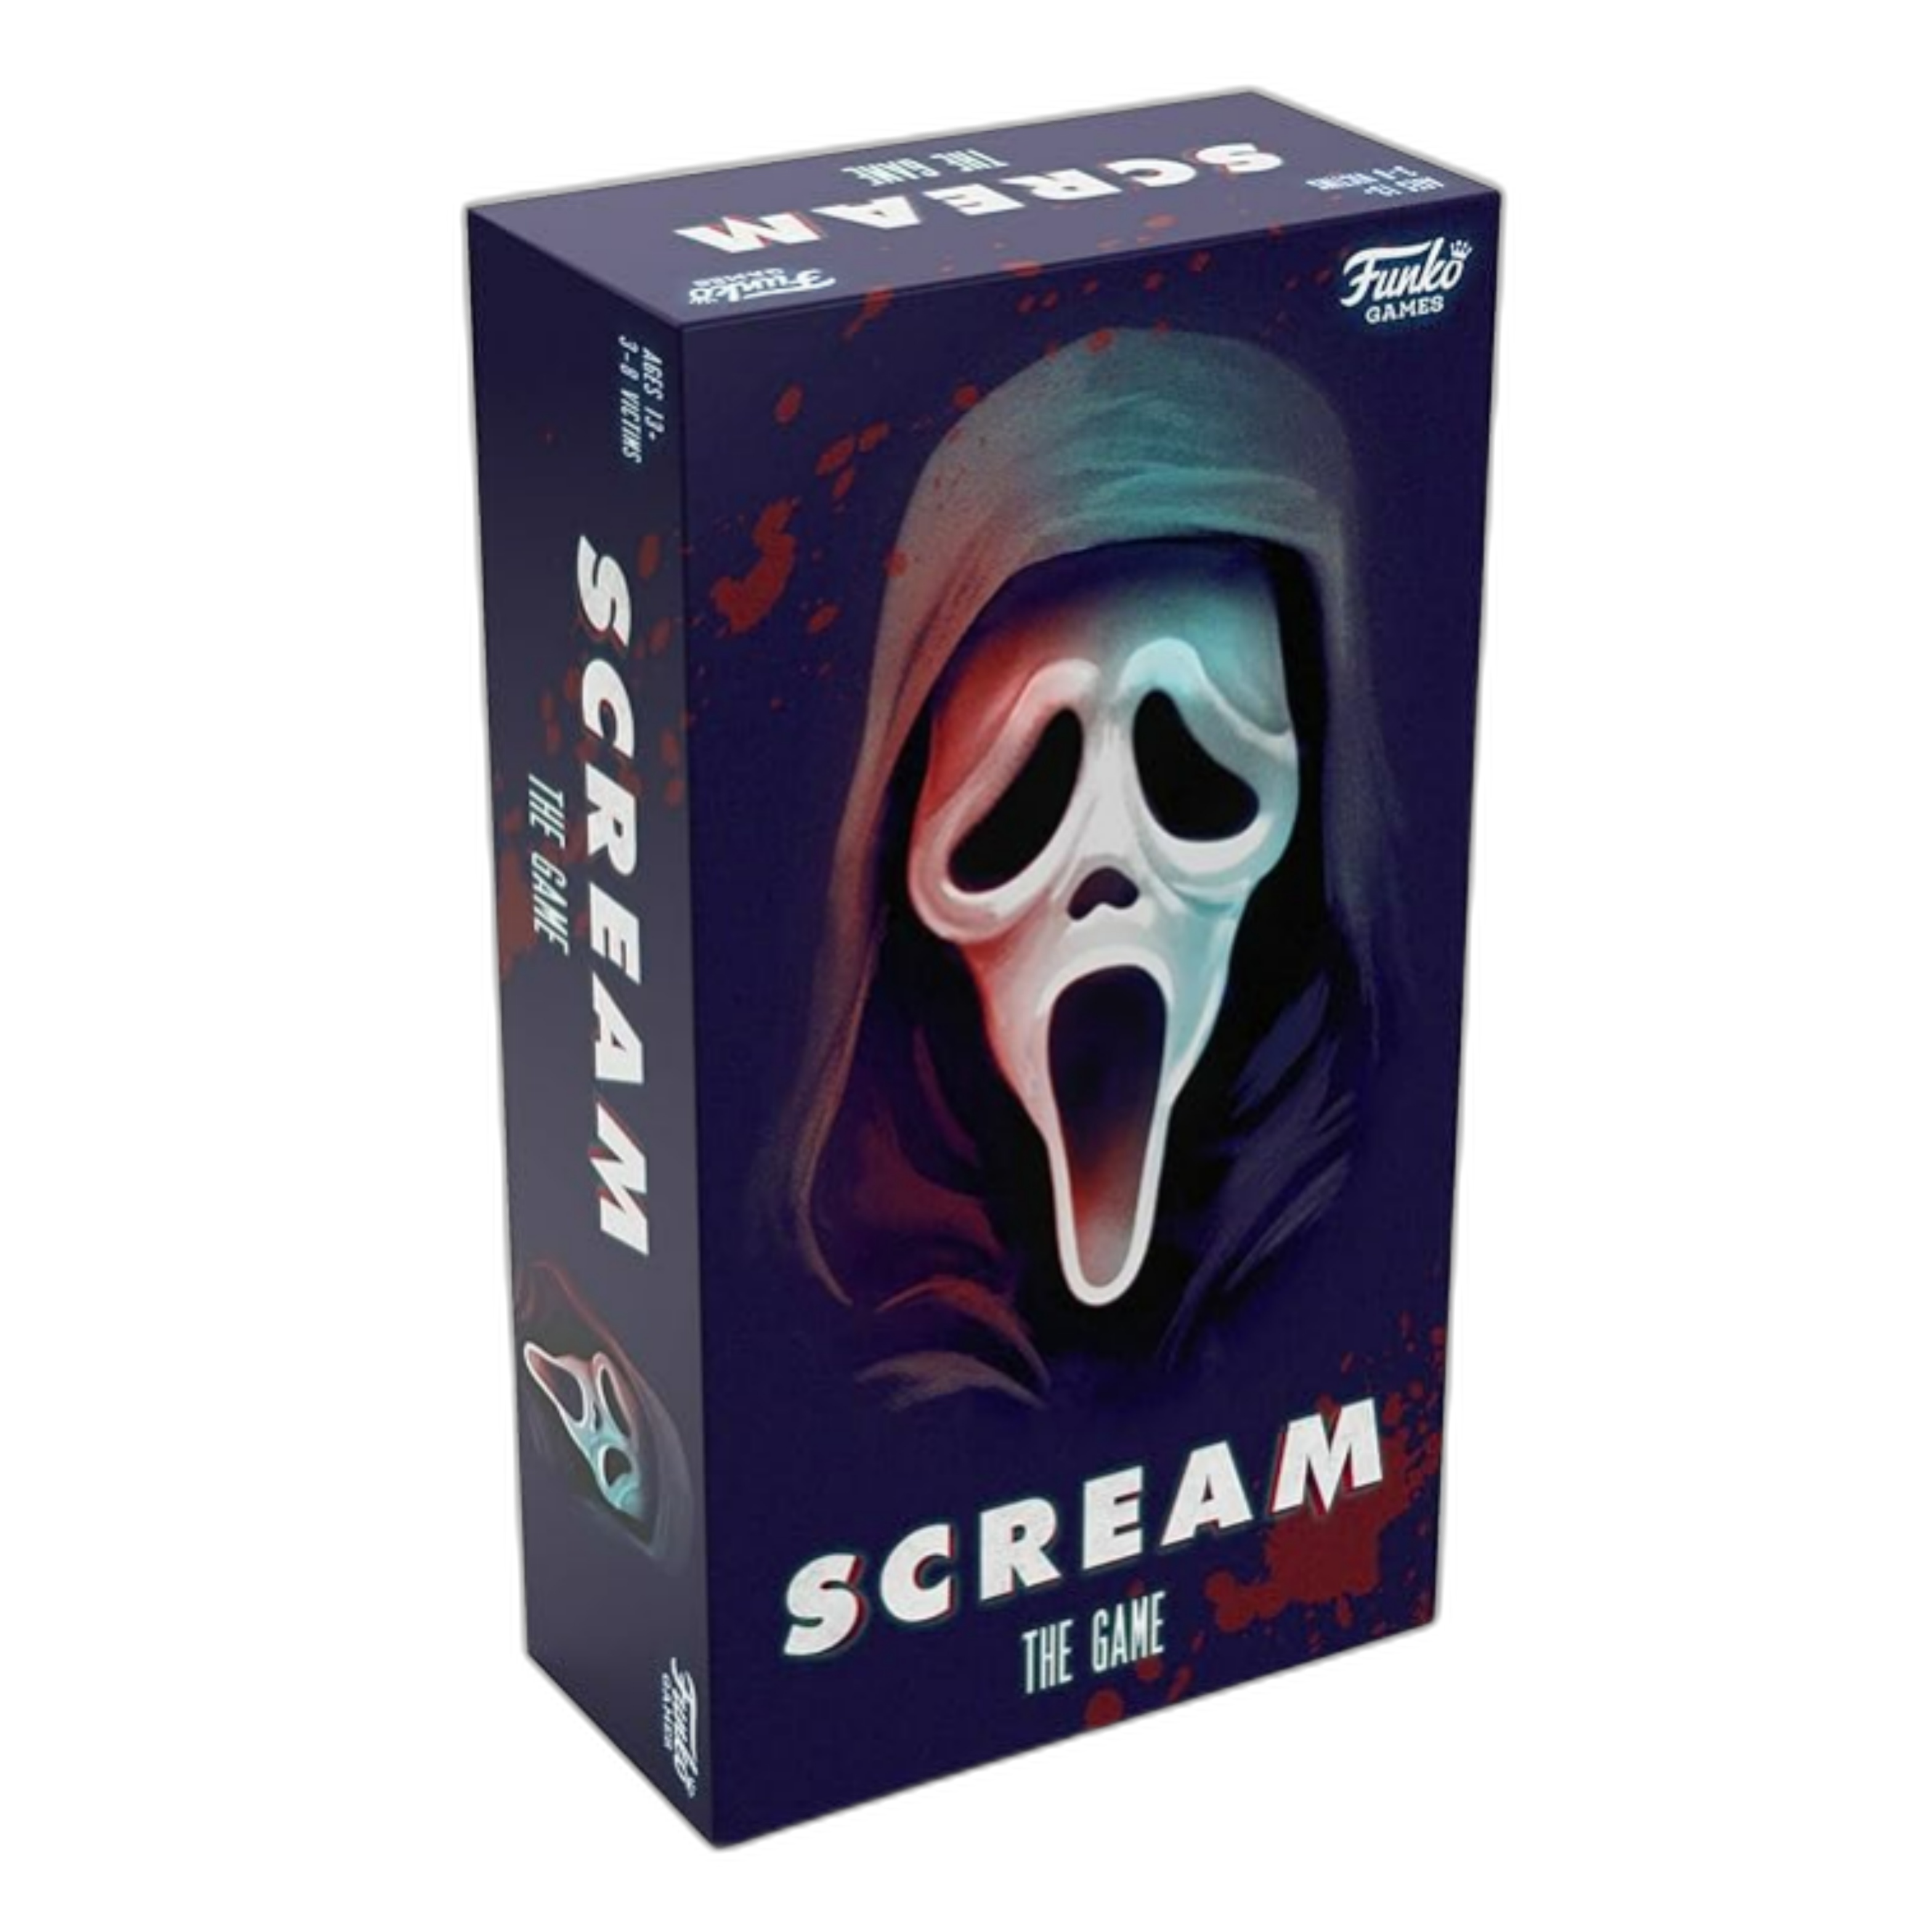 Funko Scream Party game depicting the scream logo and iconic Ghostface mask.